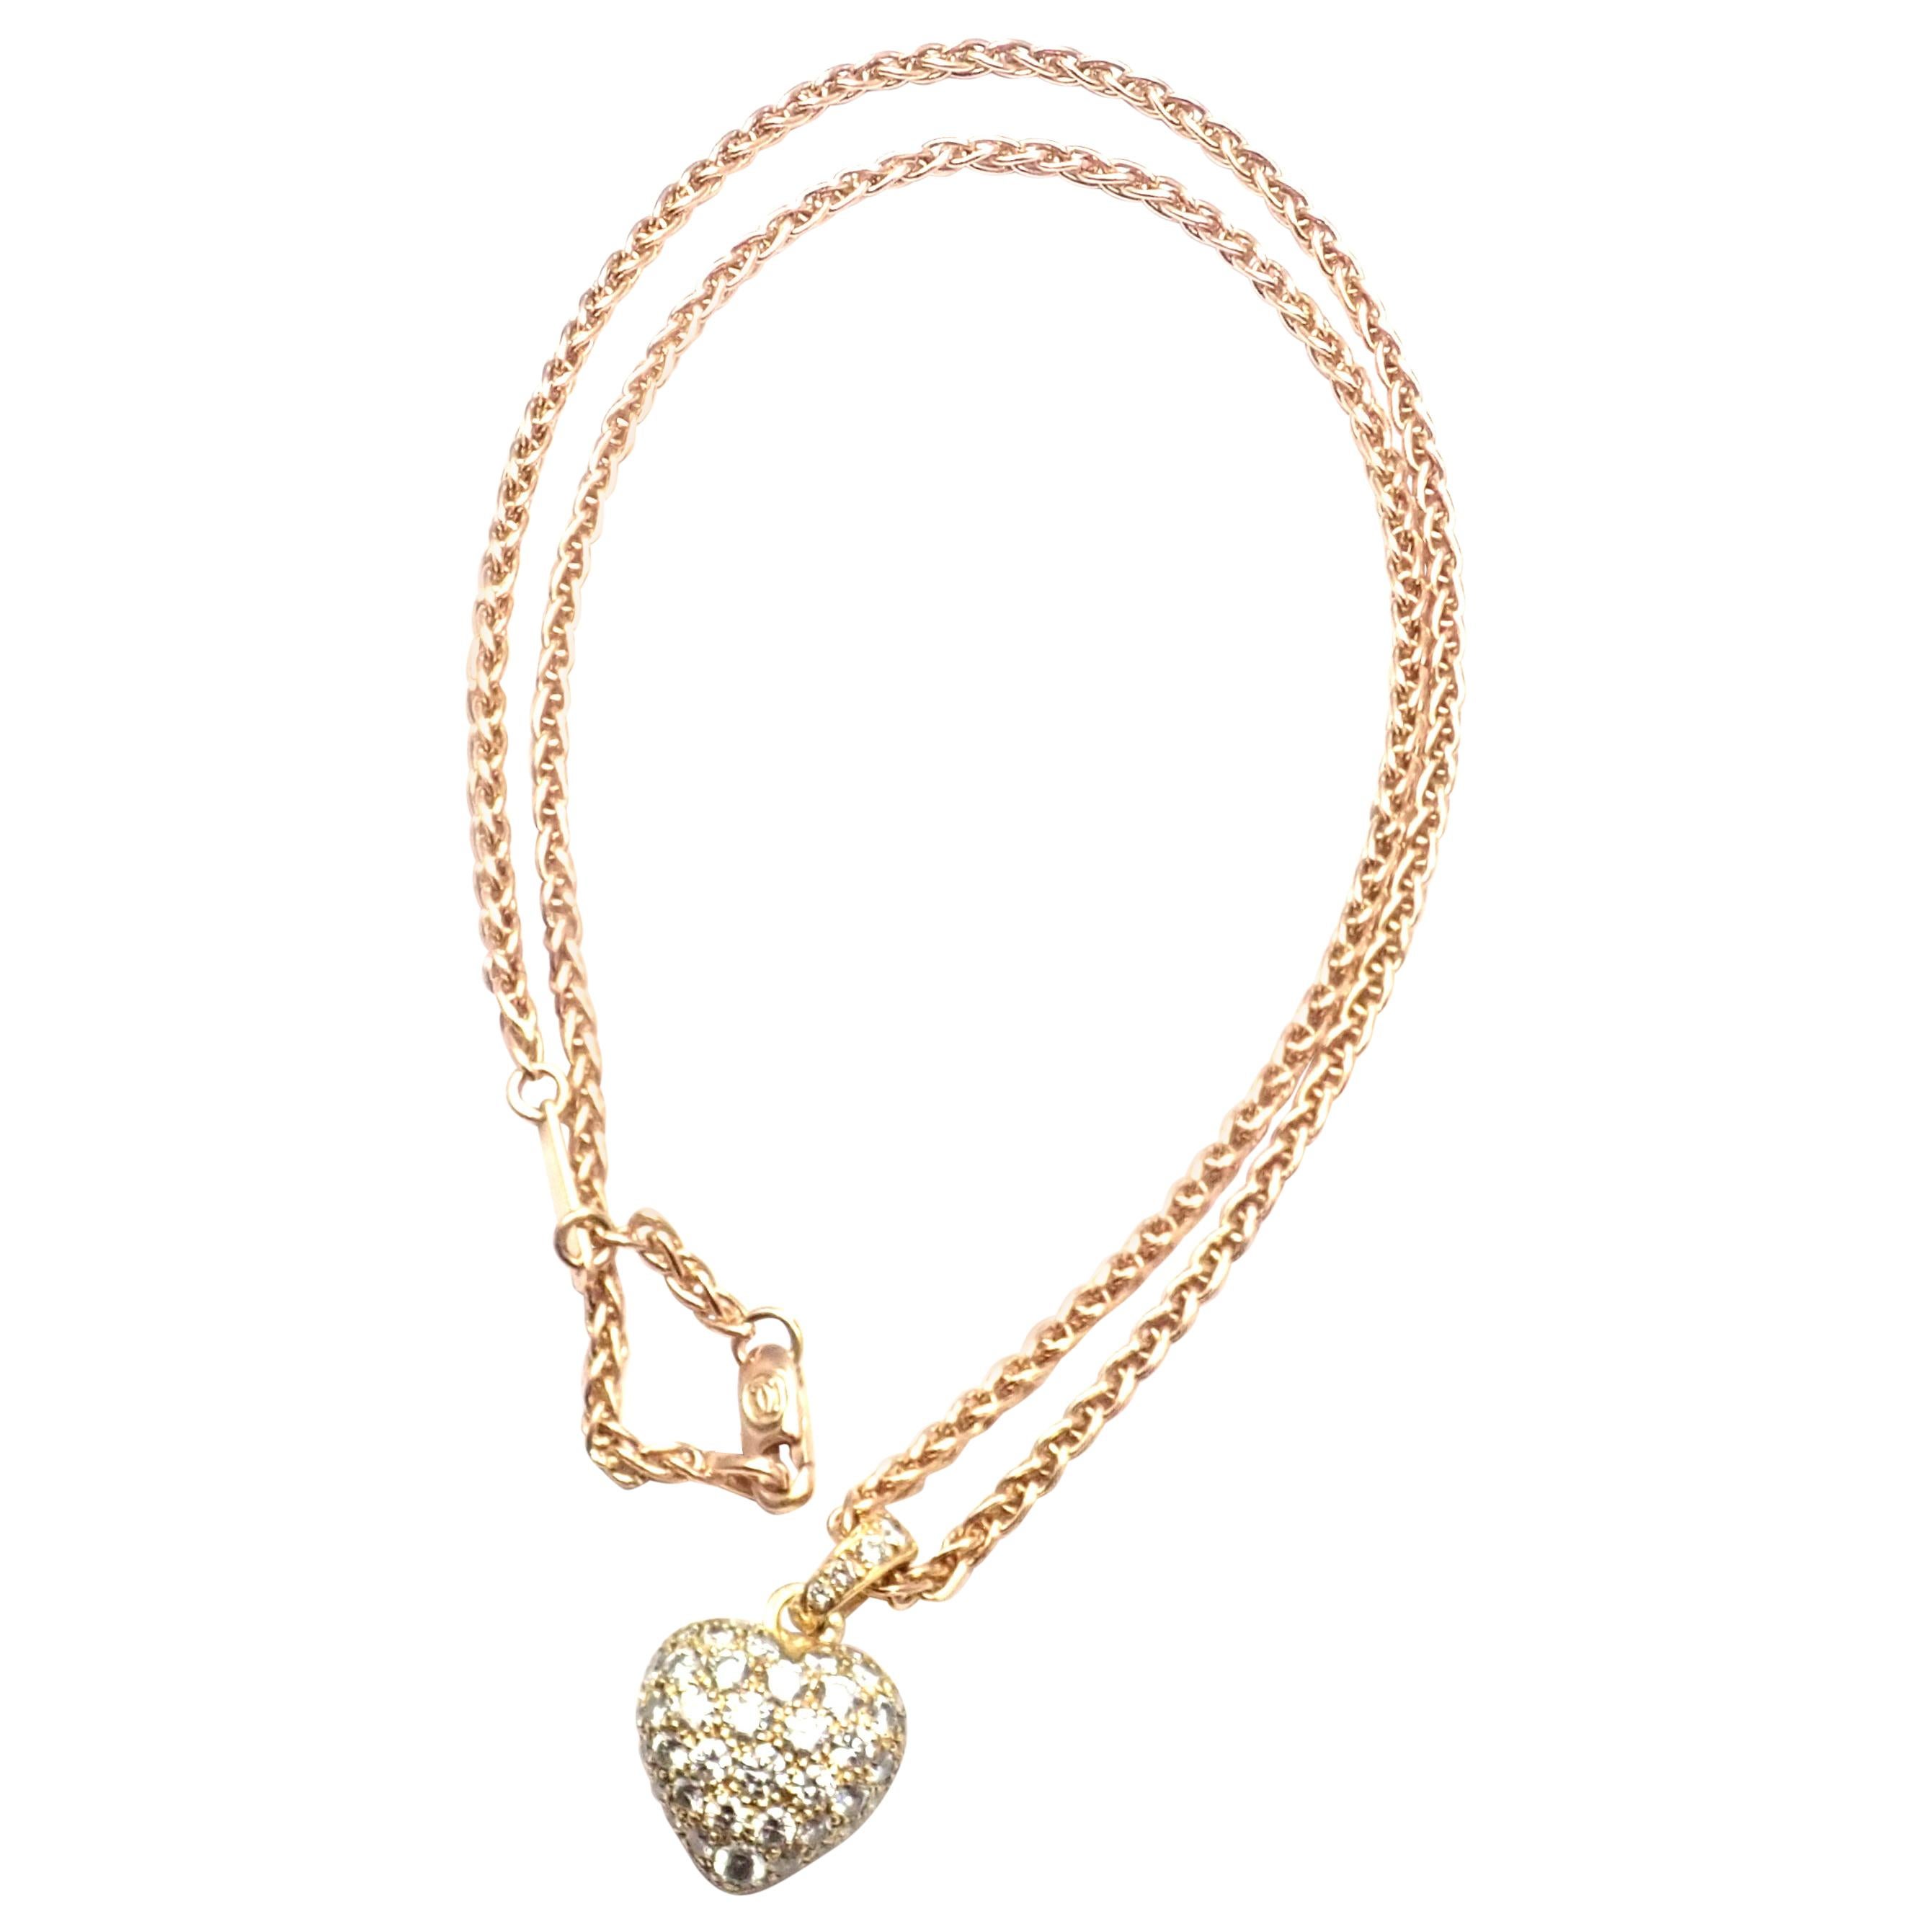 14K Large Loopy Heart Necklace | Royal Chain Group